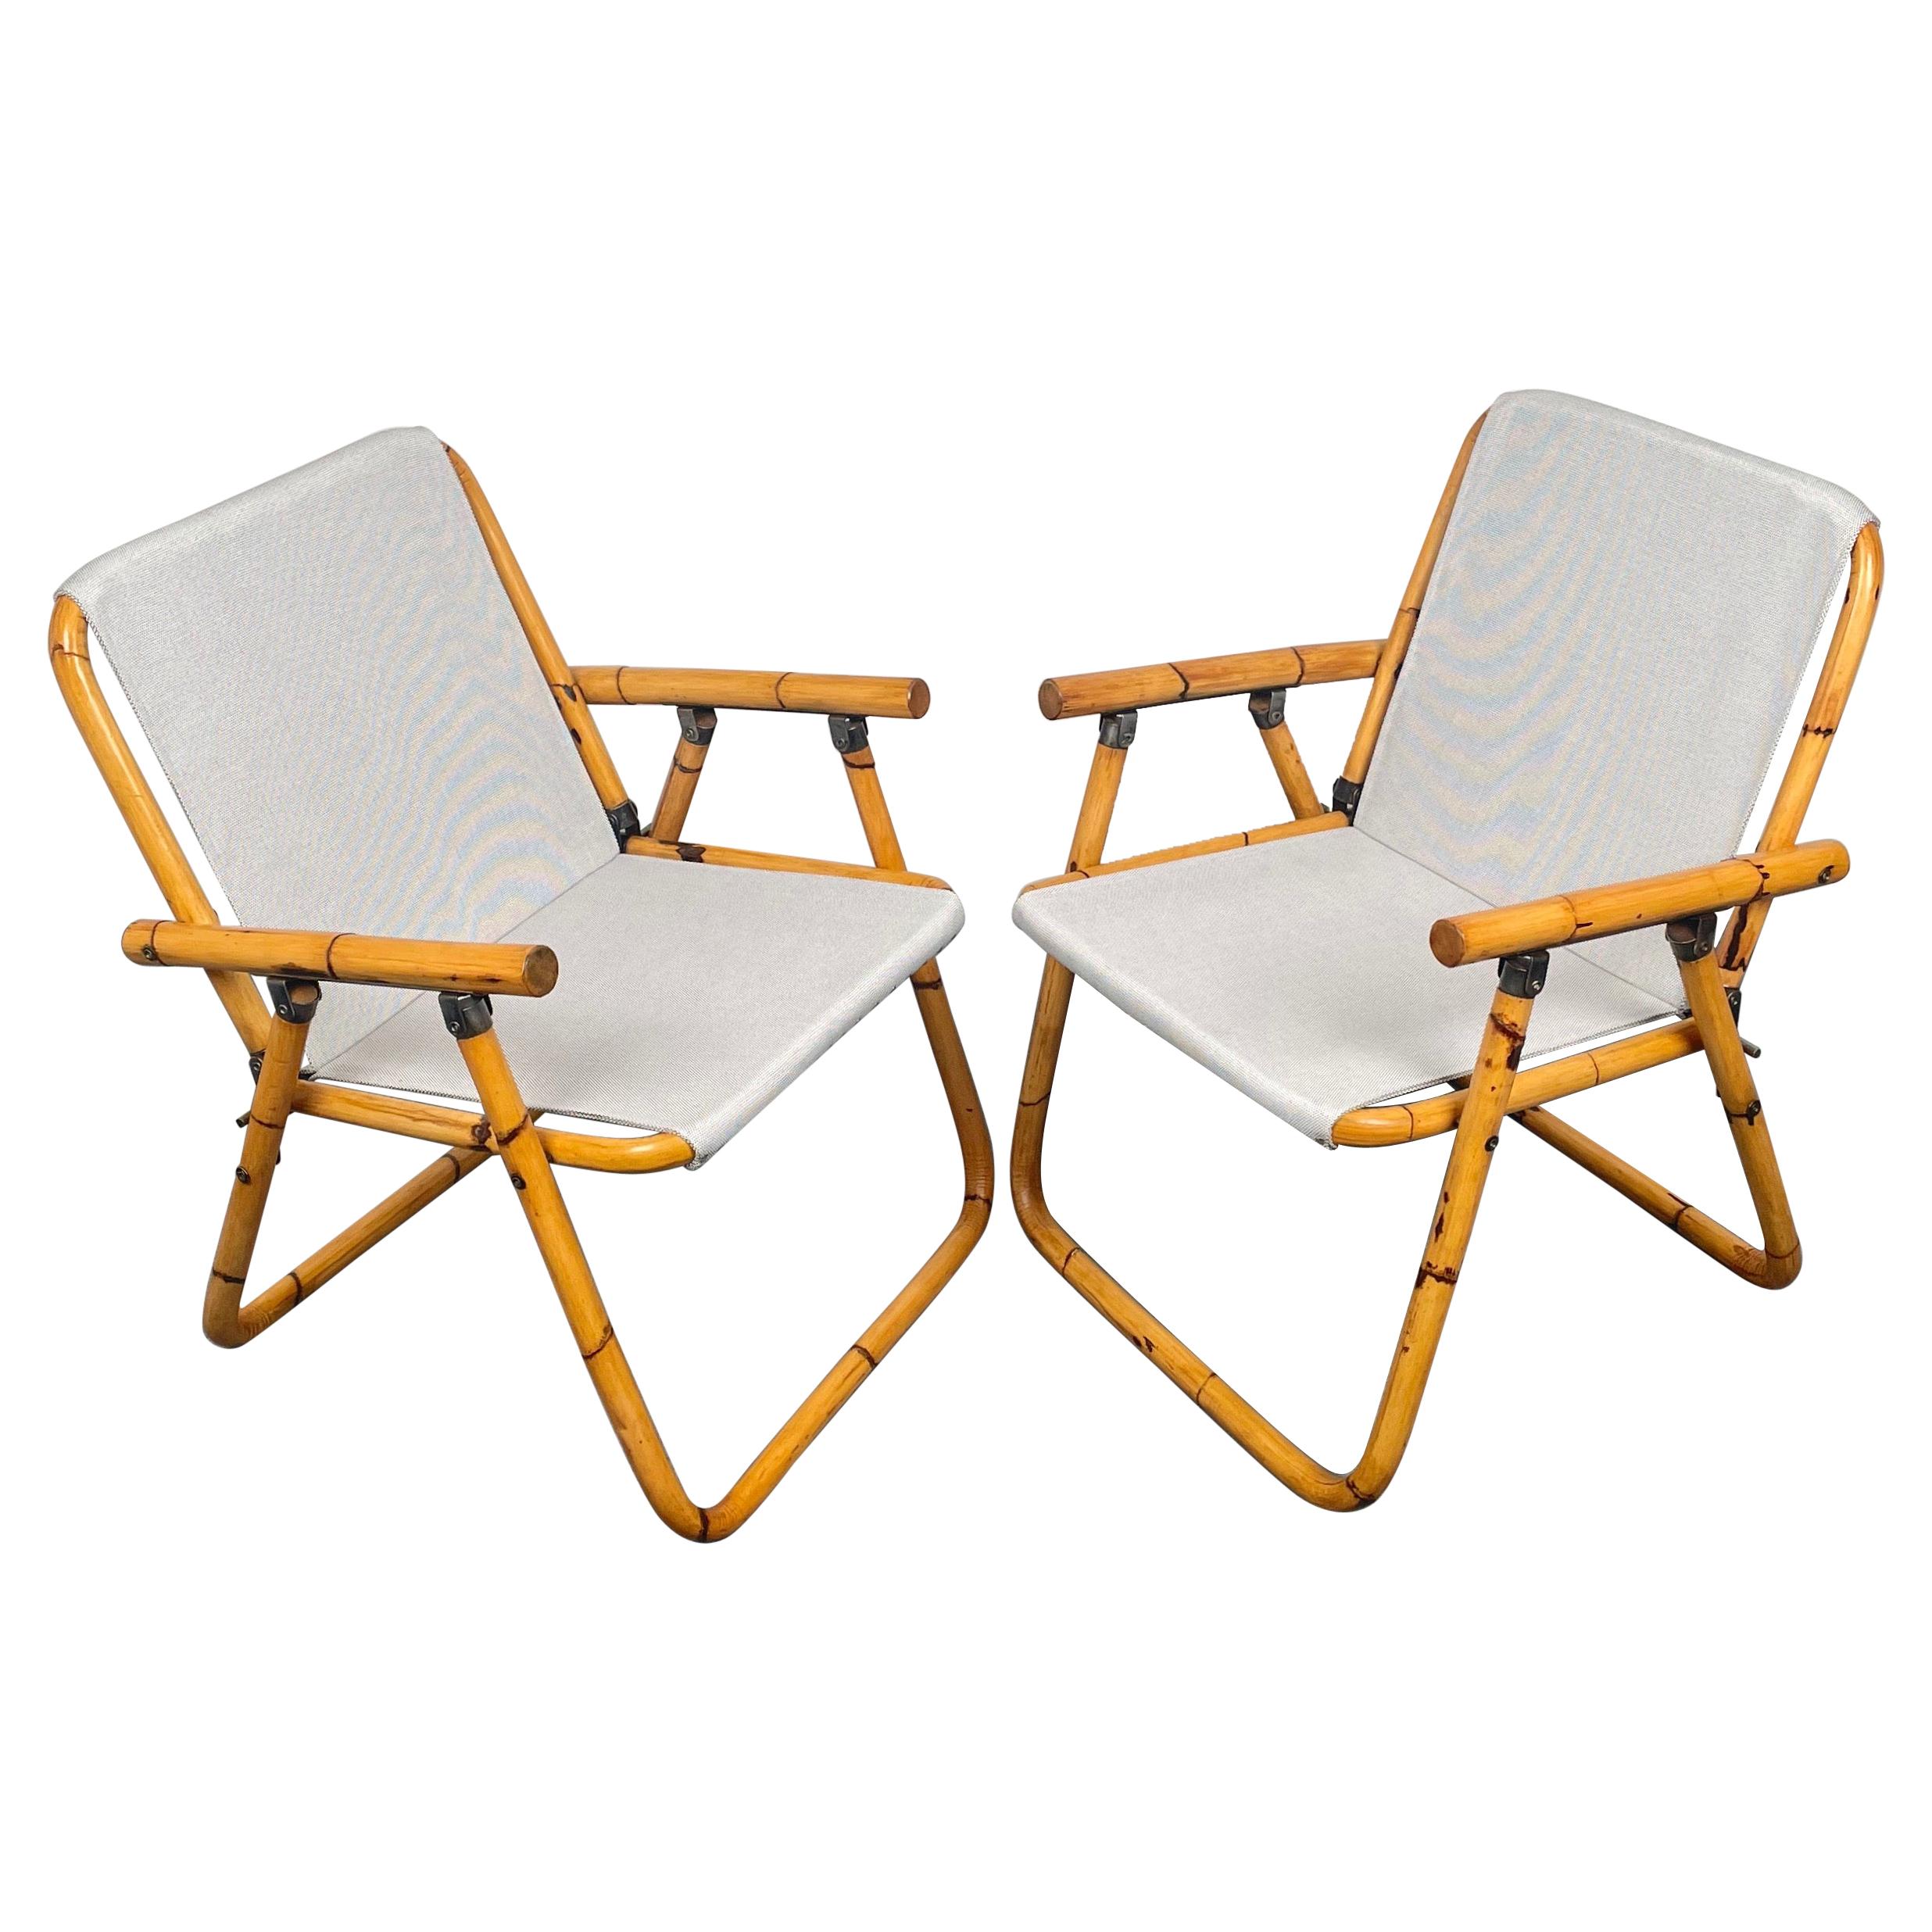 Pair of Bamboo, Iron and Fabric Folding Chair, Italy, 1960s